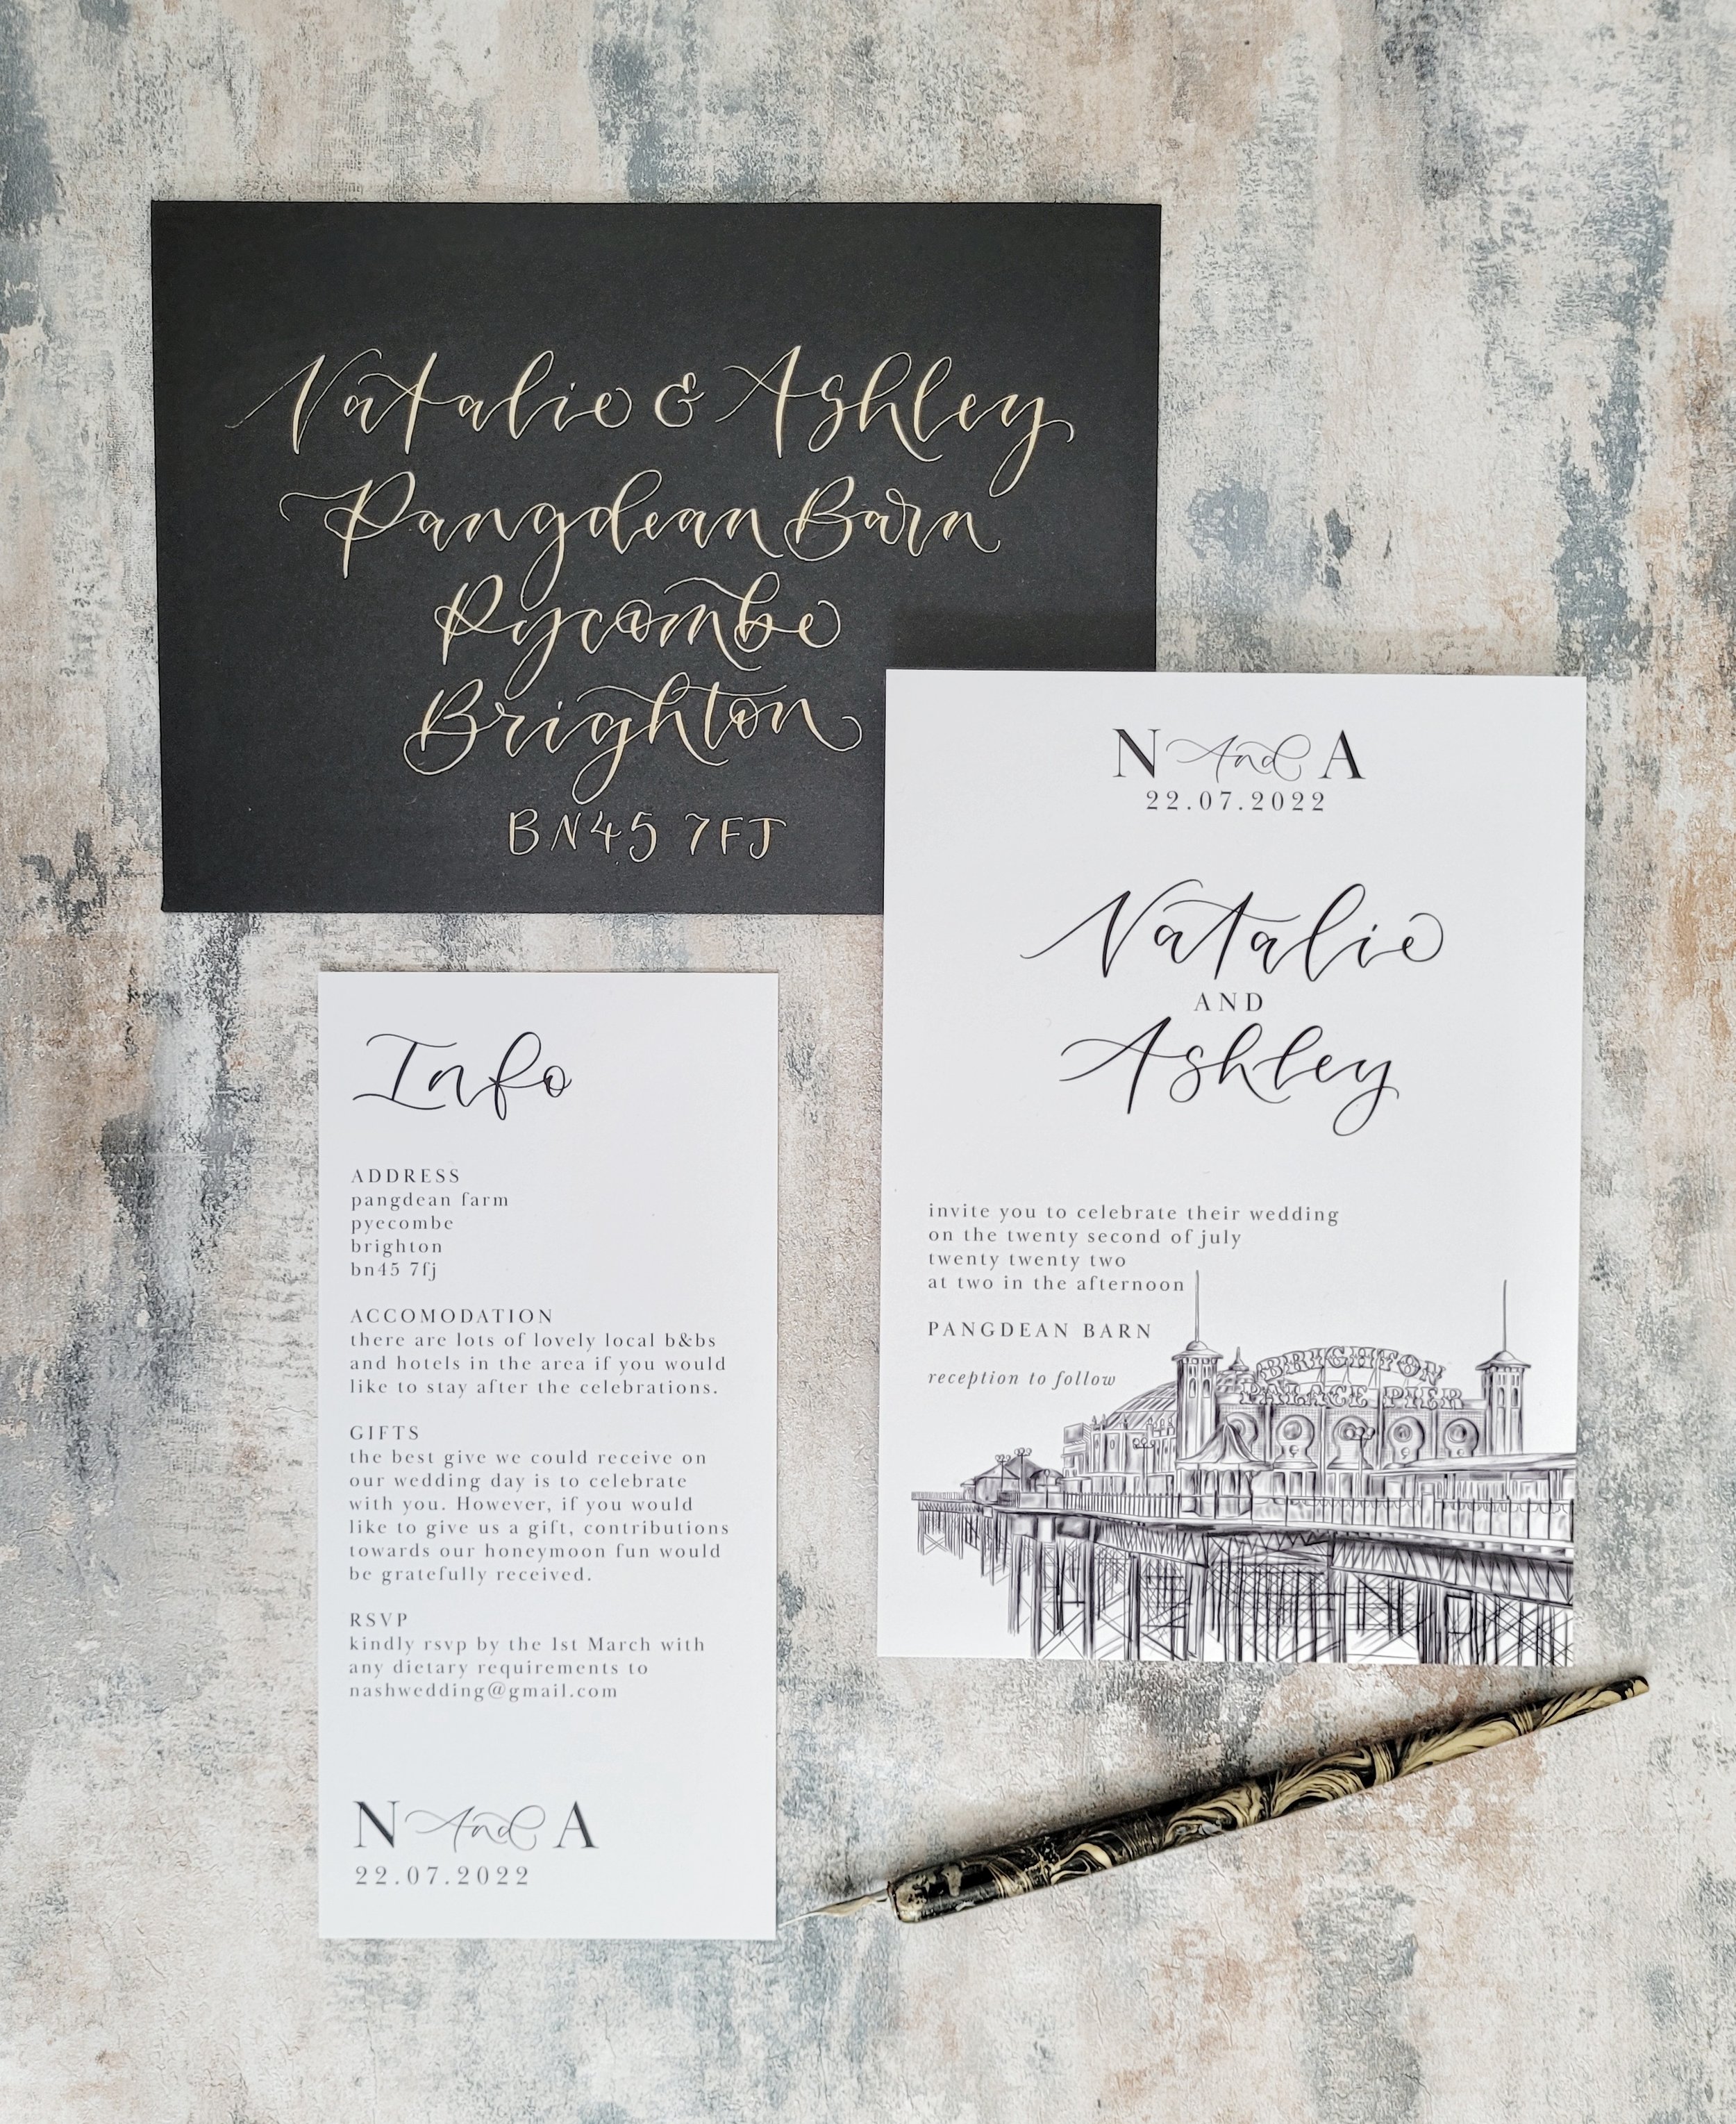 Brighton wedding stationery with pier illustration and modern calligraphy - monochrome minimalist invitation set - invitation calligraphy envelope and information details card.jpeg